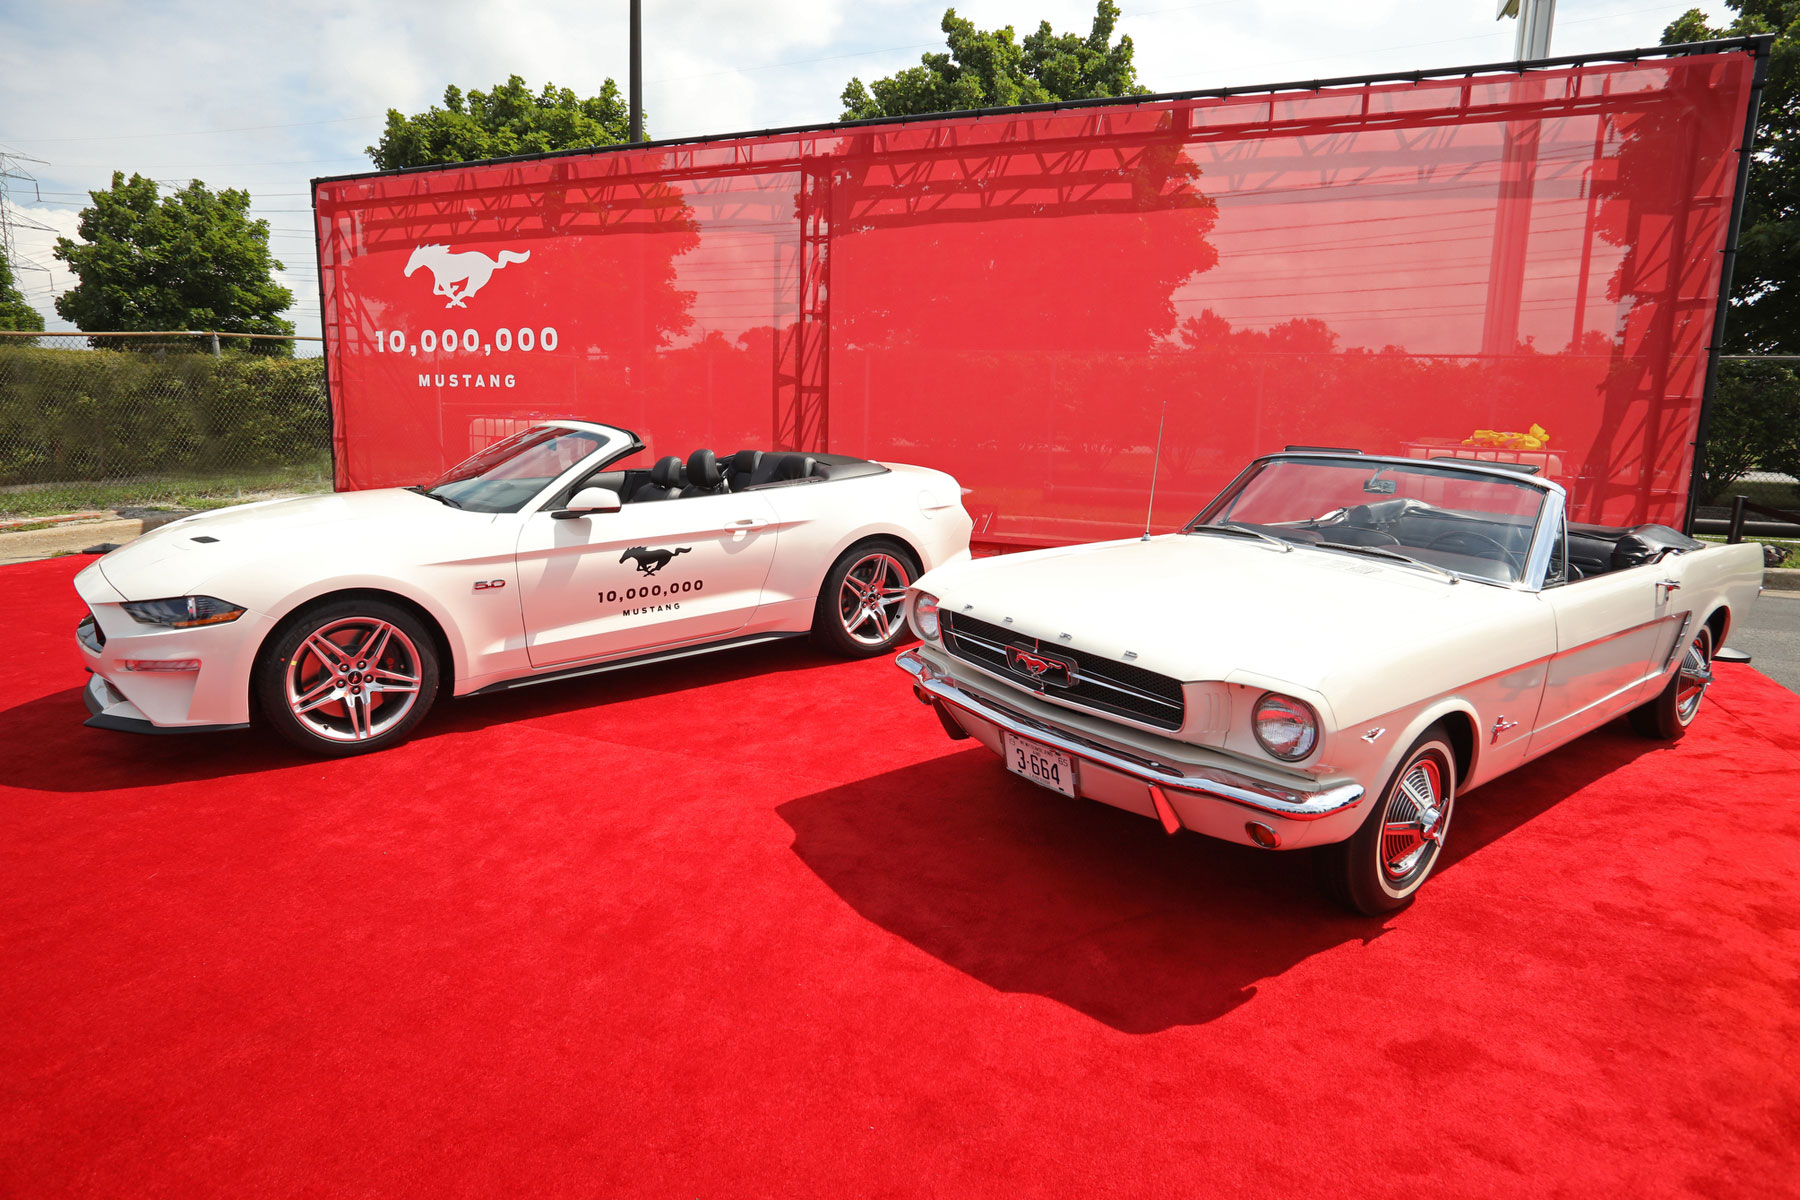 First meets 10 millionth Mustang